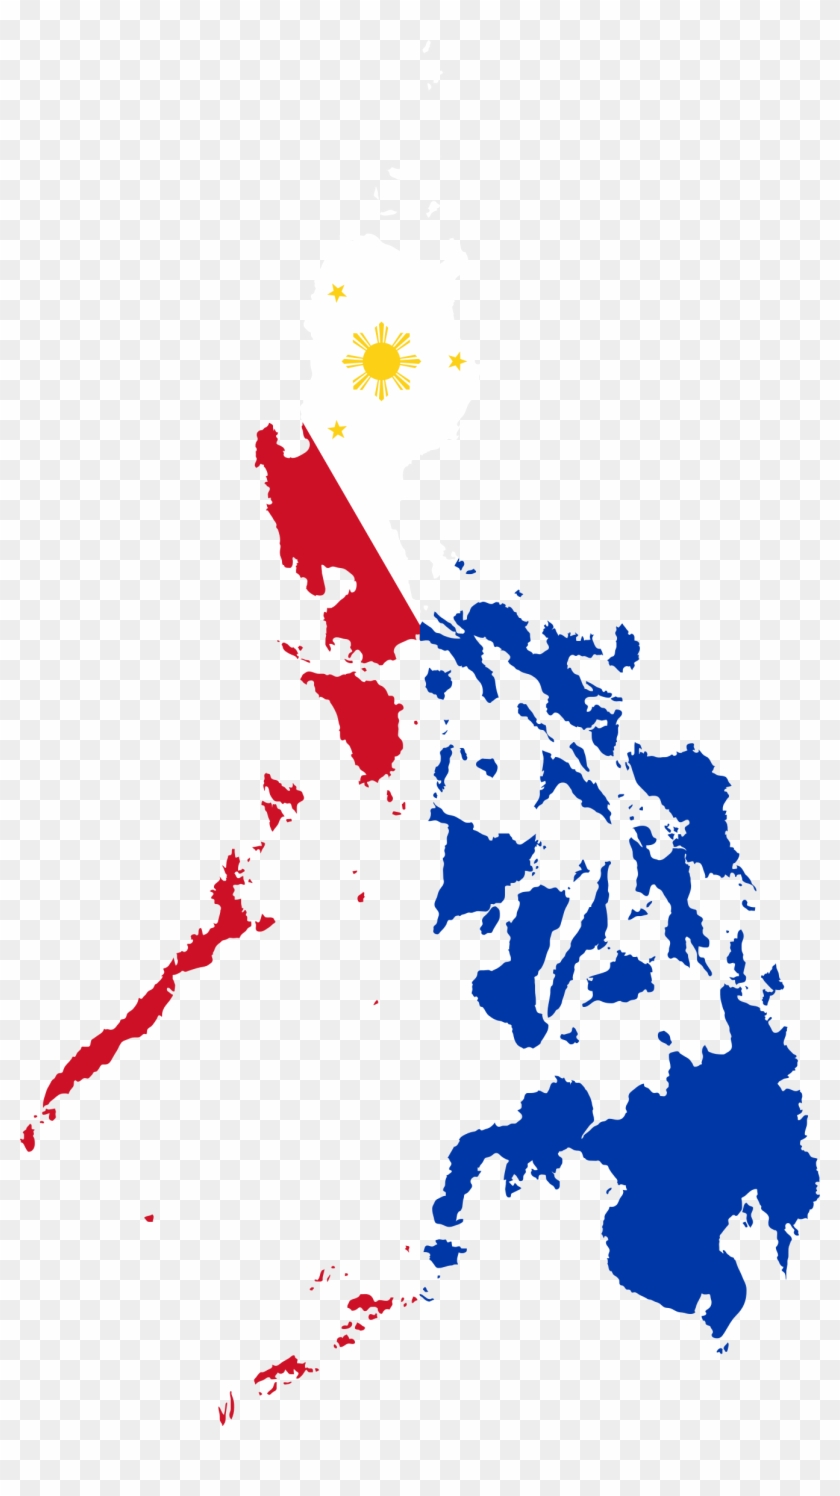 This Free Icons Png Design Of Philippines Map Flag Clipart